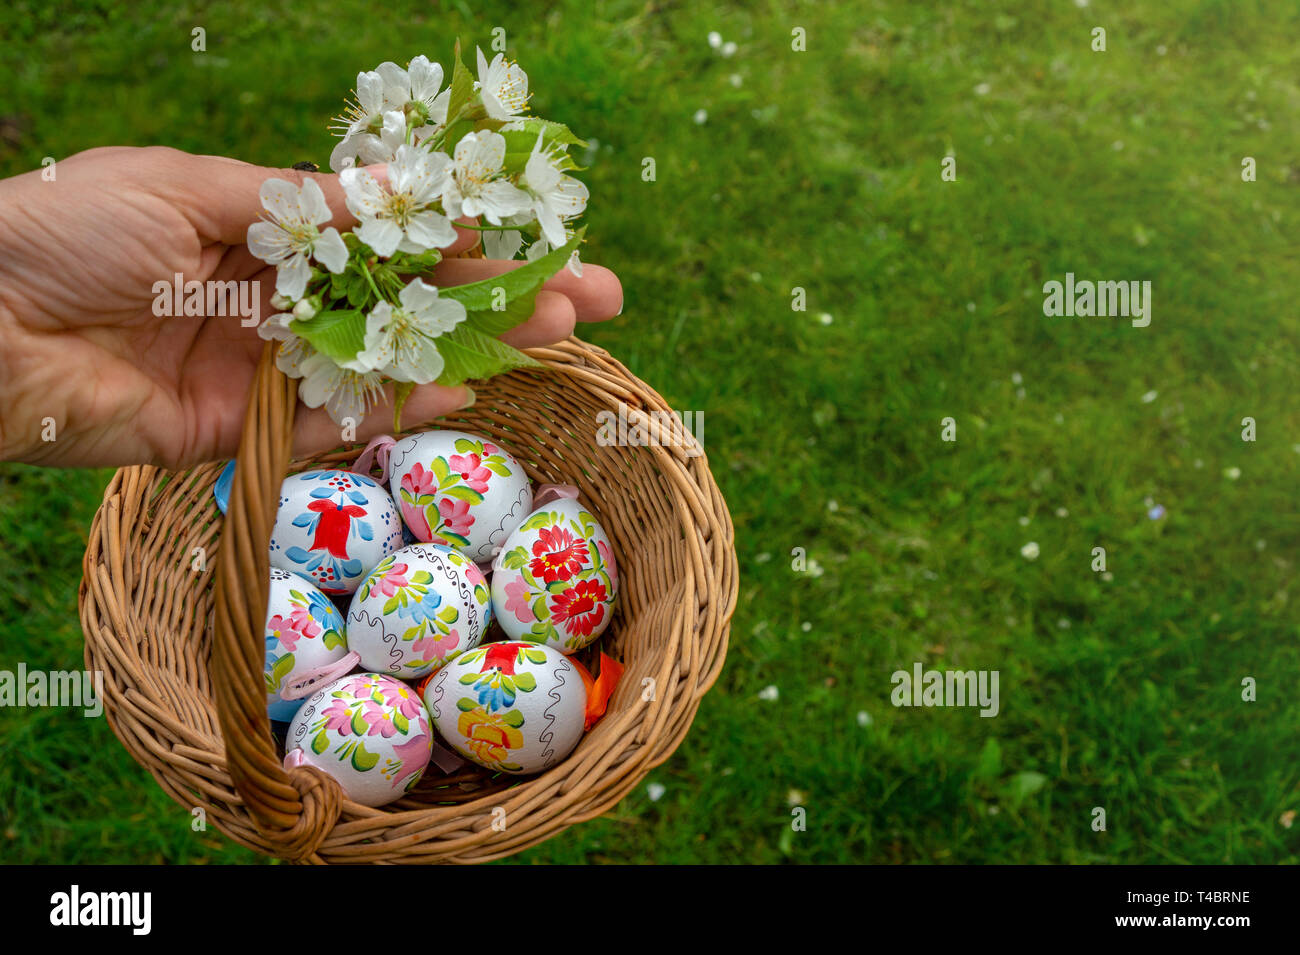 Hand holding Close up of colorful hand painted Easter eggs in a basket with cherry blossom Stock Photo